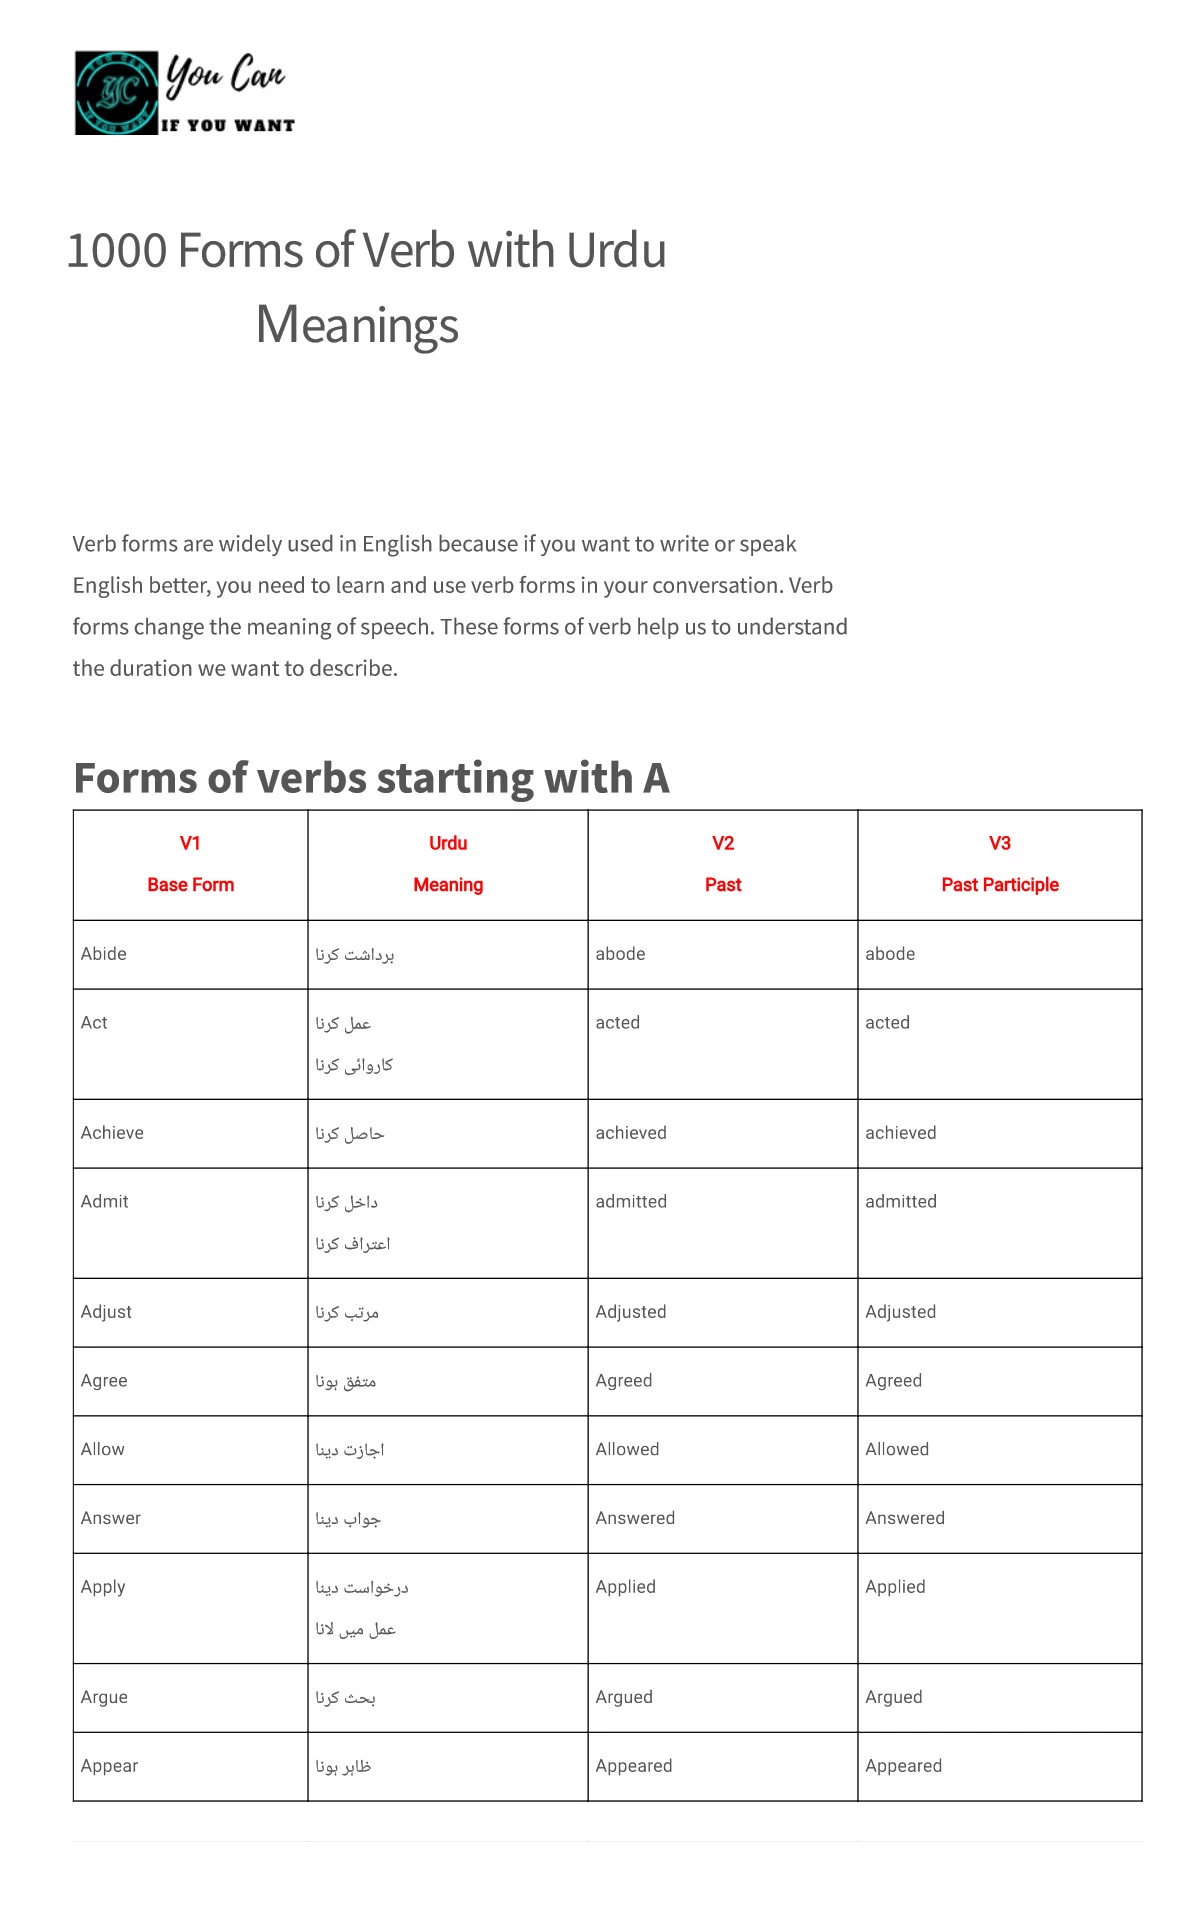 1000 Forms 1st 2nd 3rd Form of Verb with Urdu Meaning